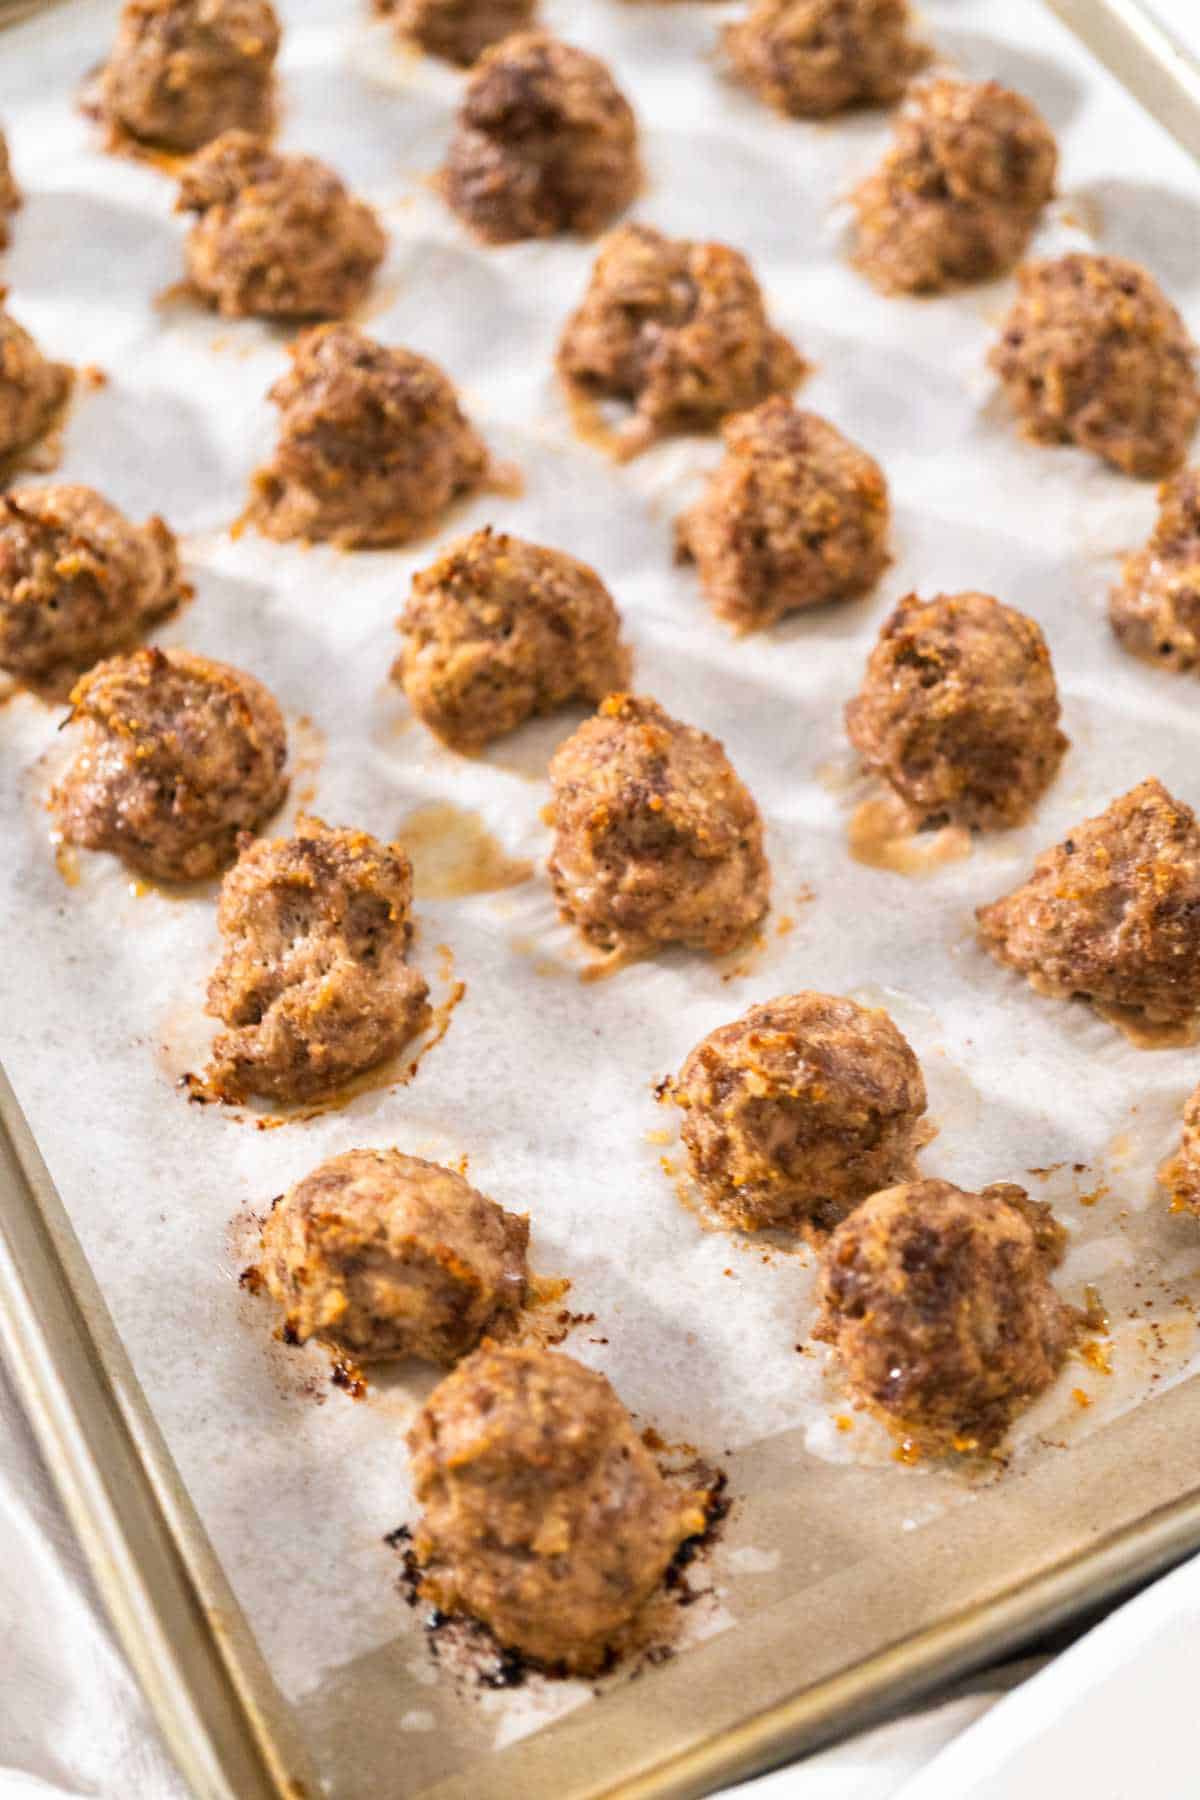 oven baked meat balls on a rimmed baking sheet.